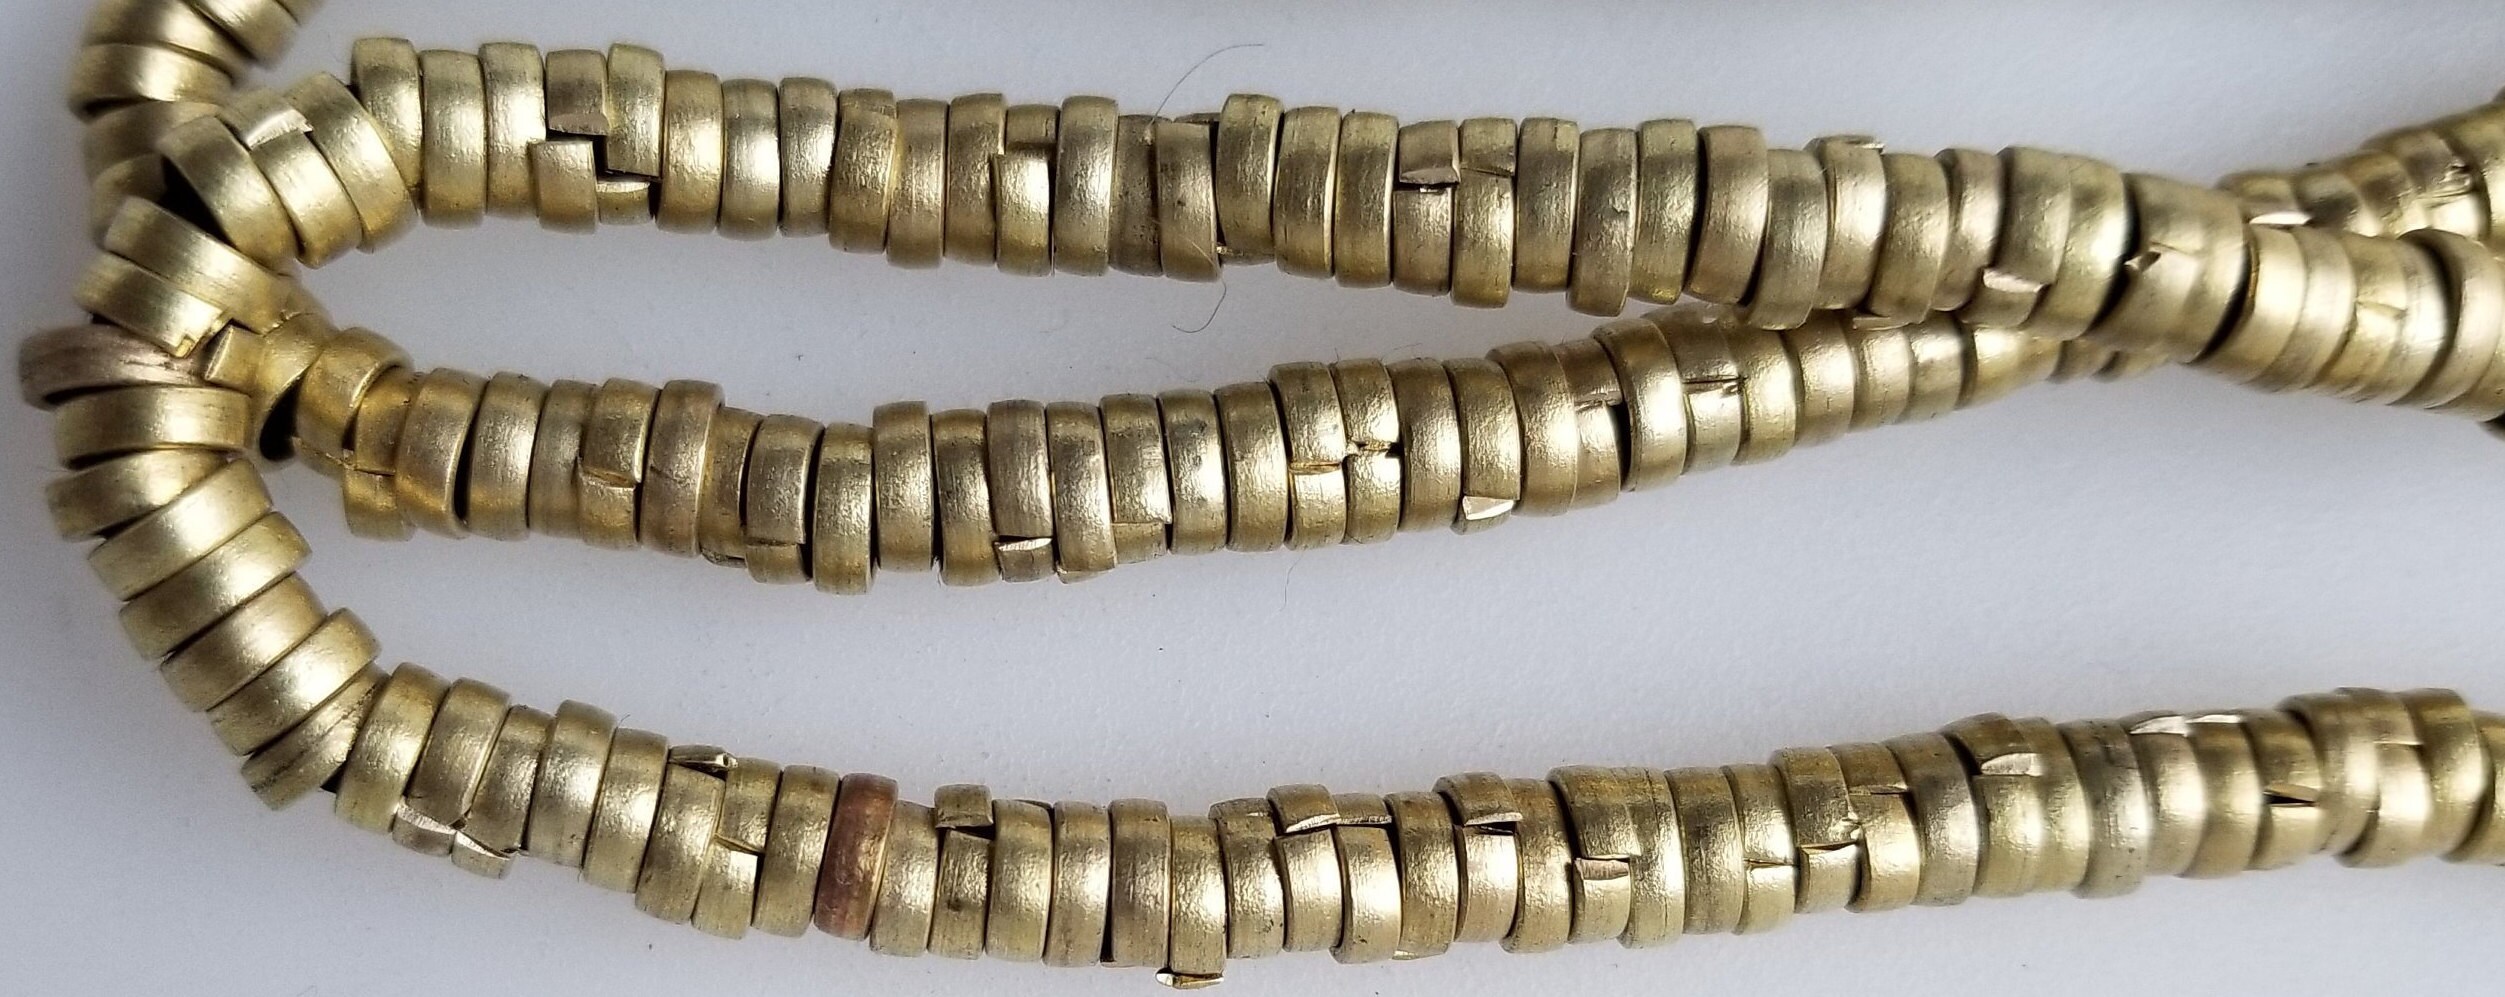 14 inches or 180-182 Afghan heishi beads brass beads Kuchi | Etsy